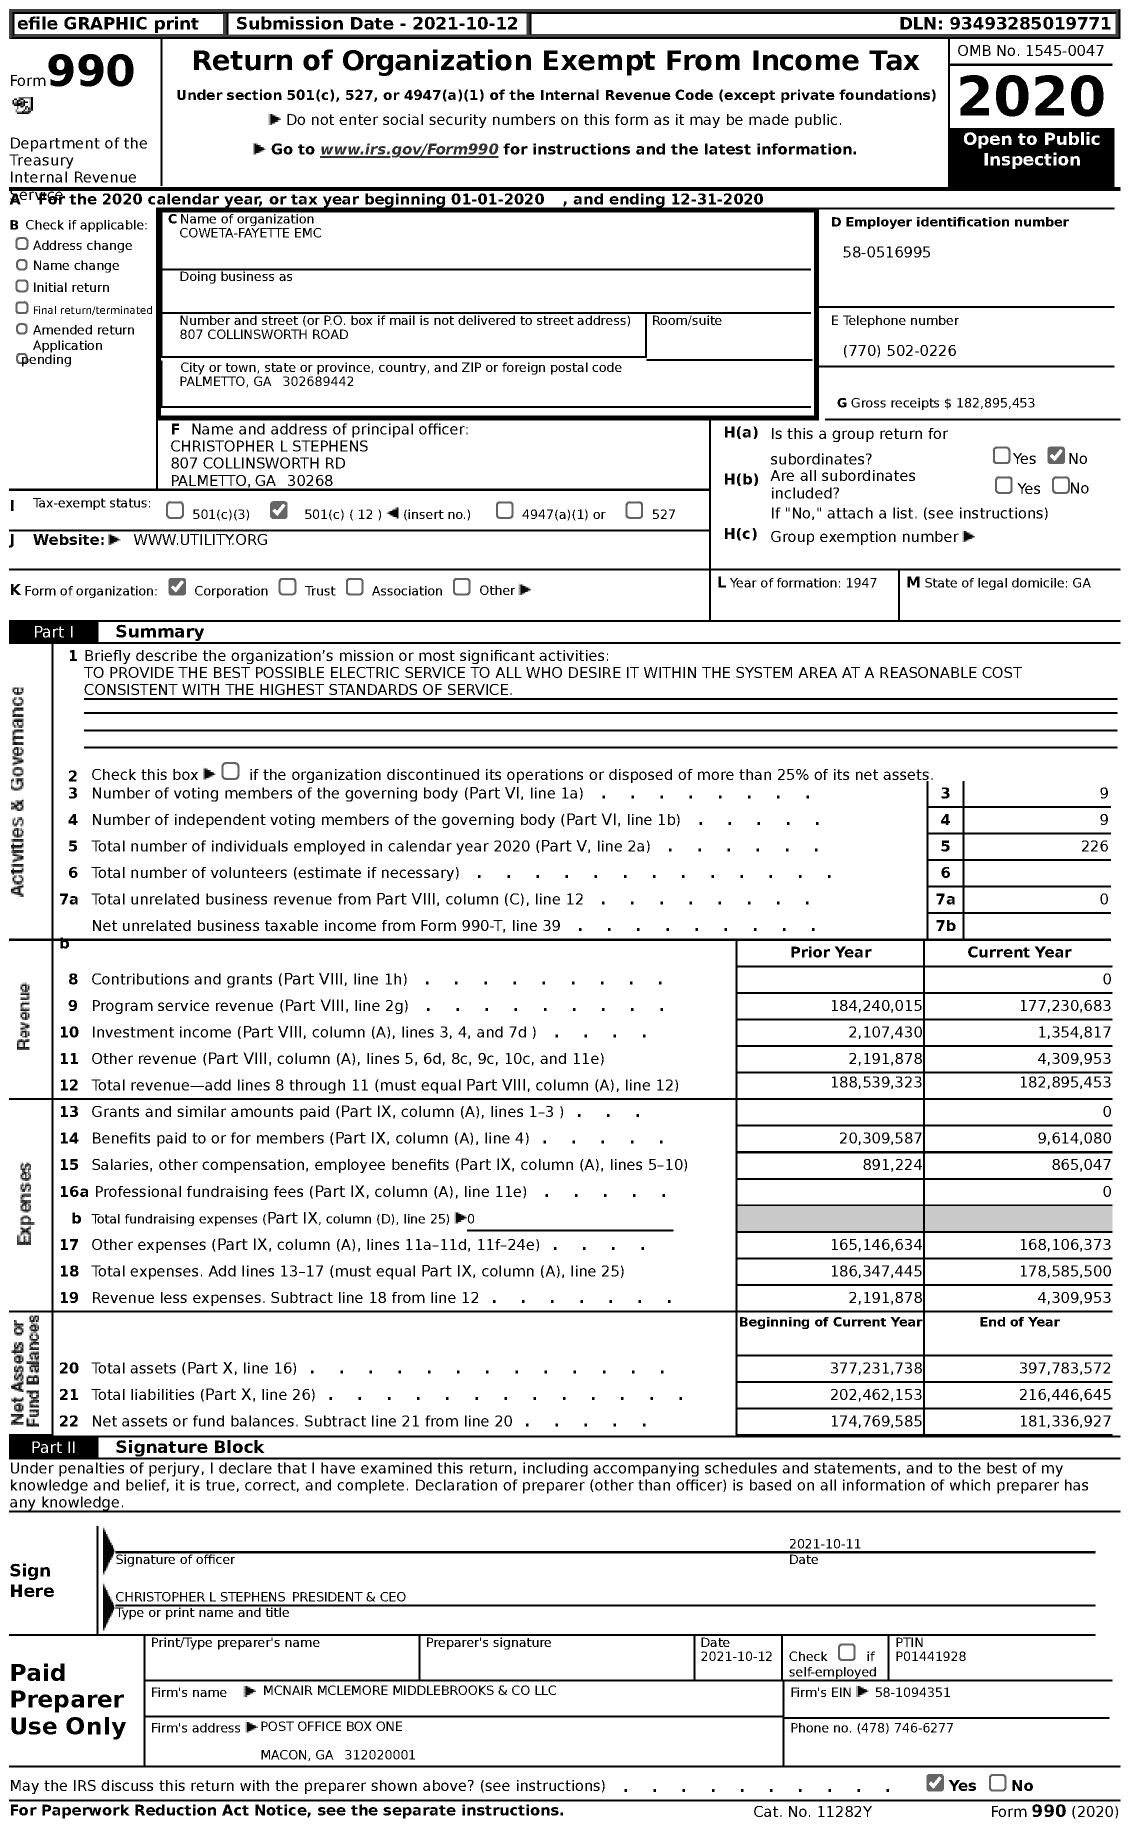 Image of first page of 2020 Form 990 for Coweta-Fayette Emc